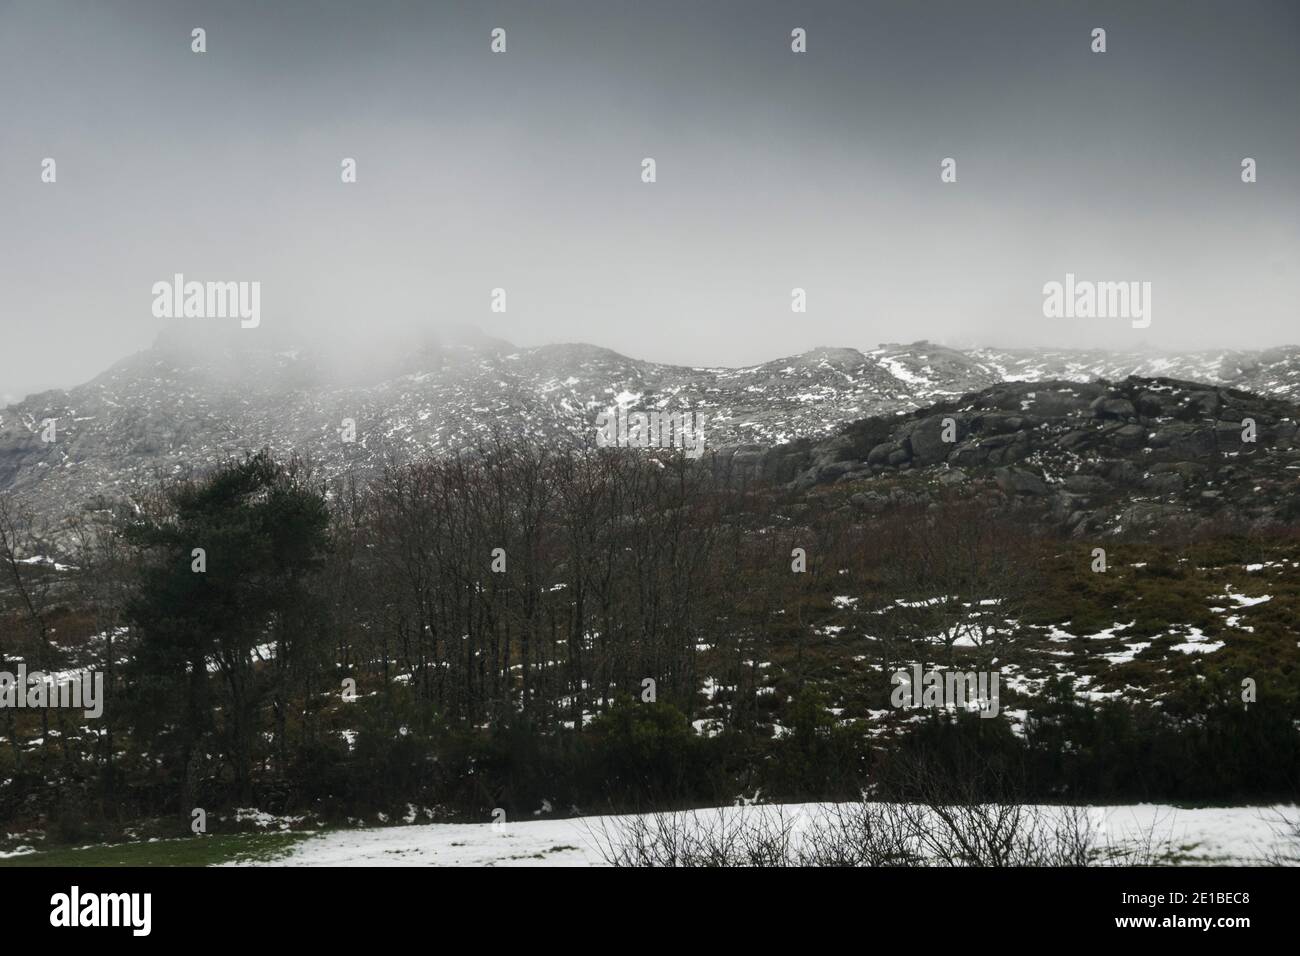 Mountain landscape with snowy capes on a foggy rainy day, as the light enters though the clouds Stock Photo